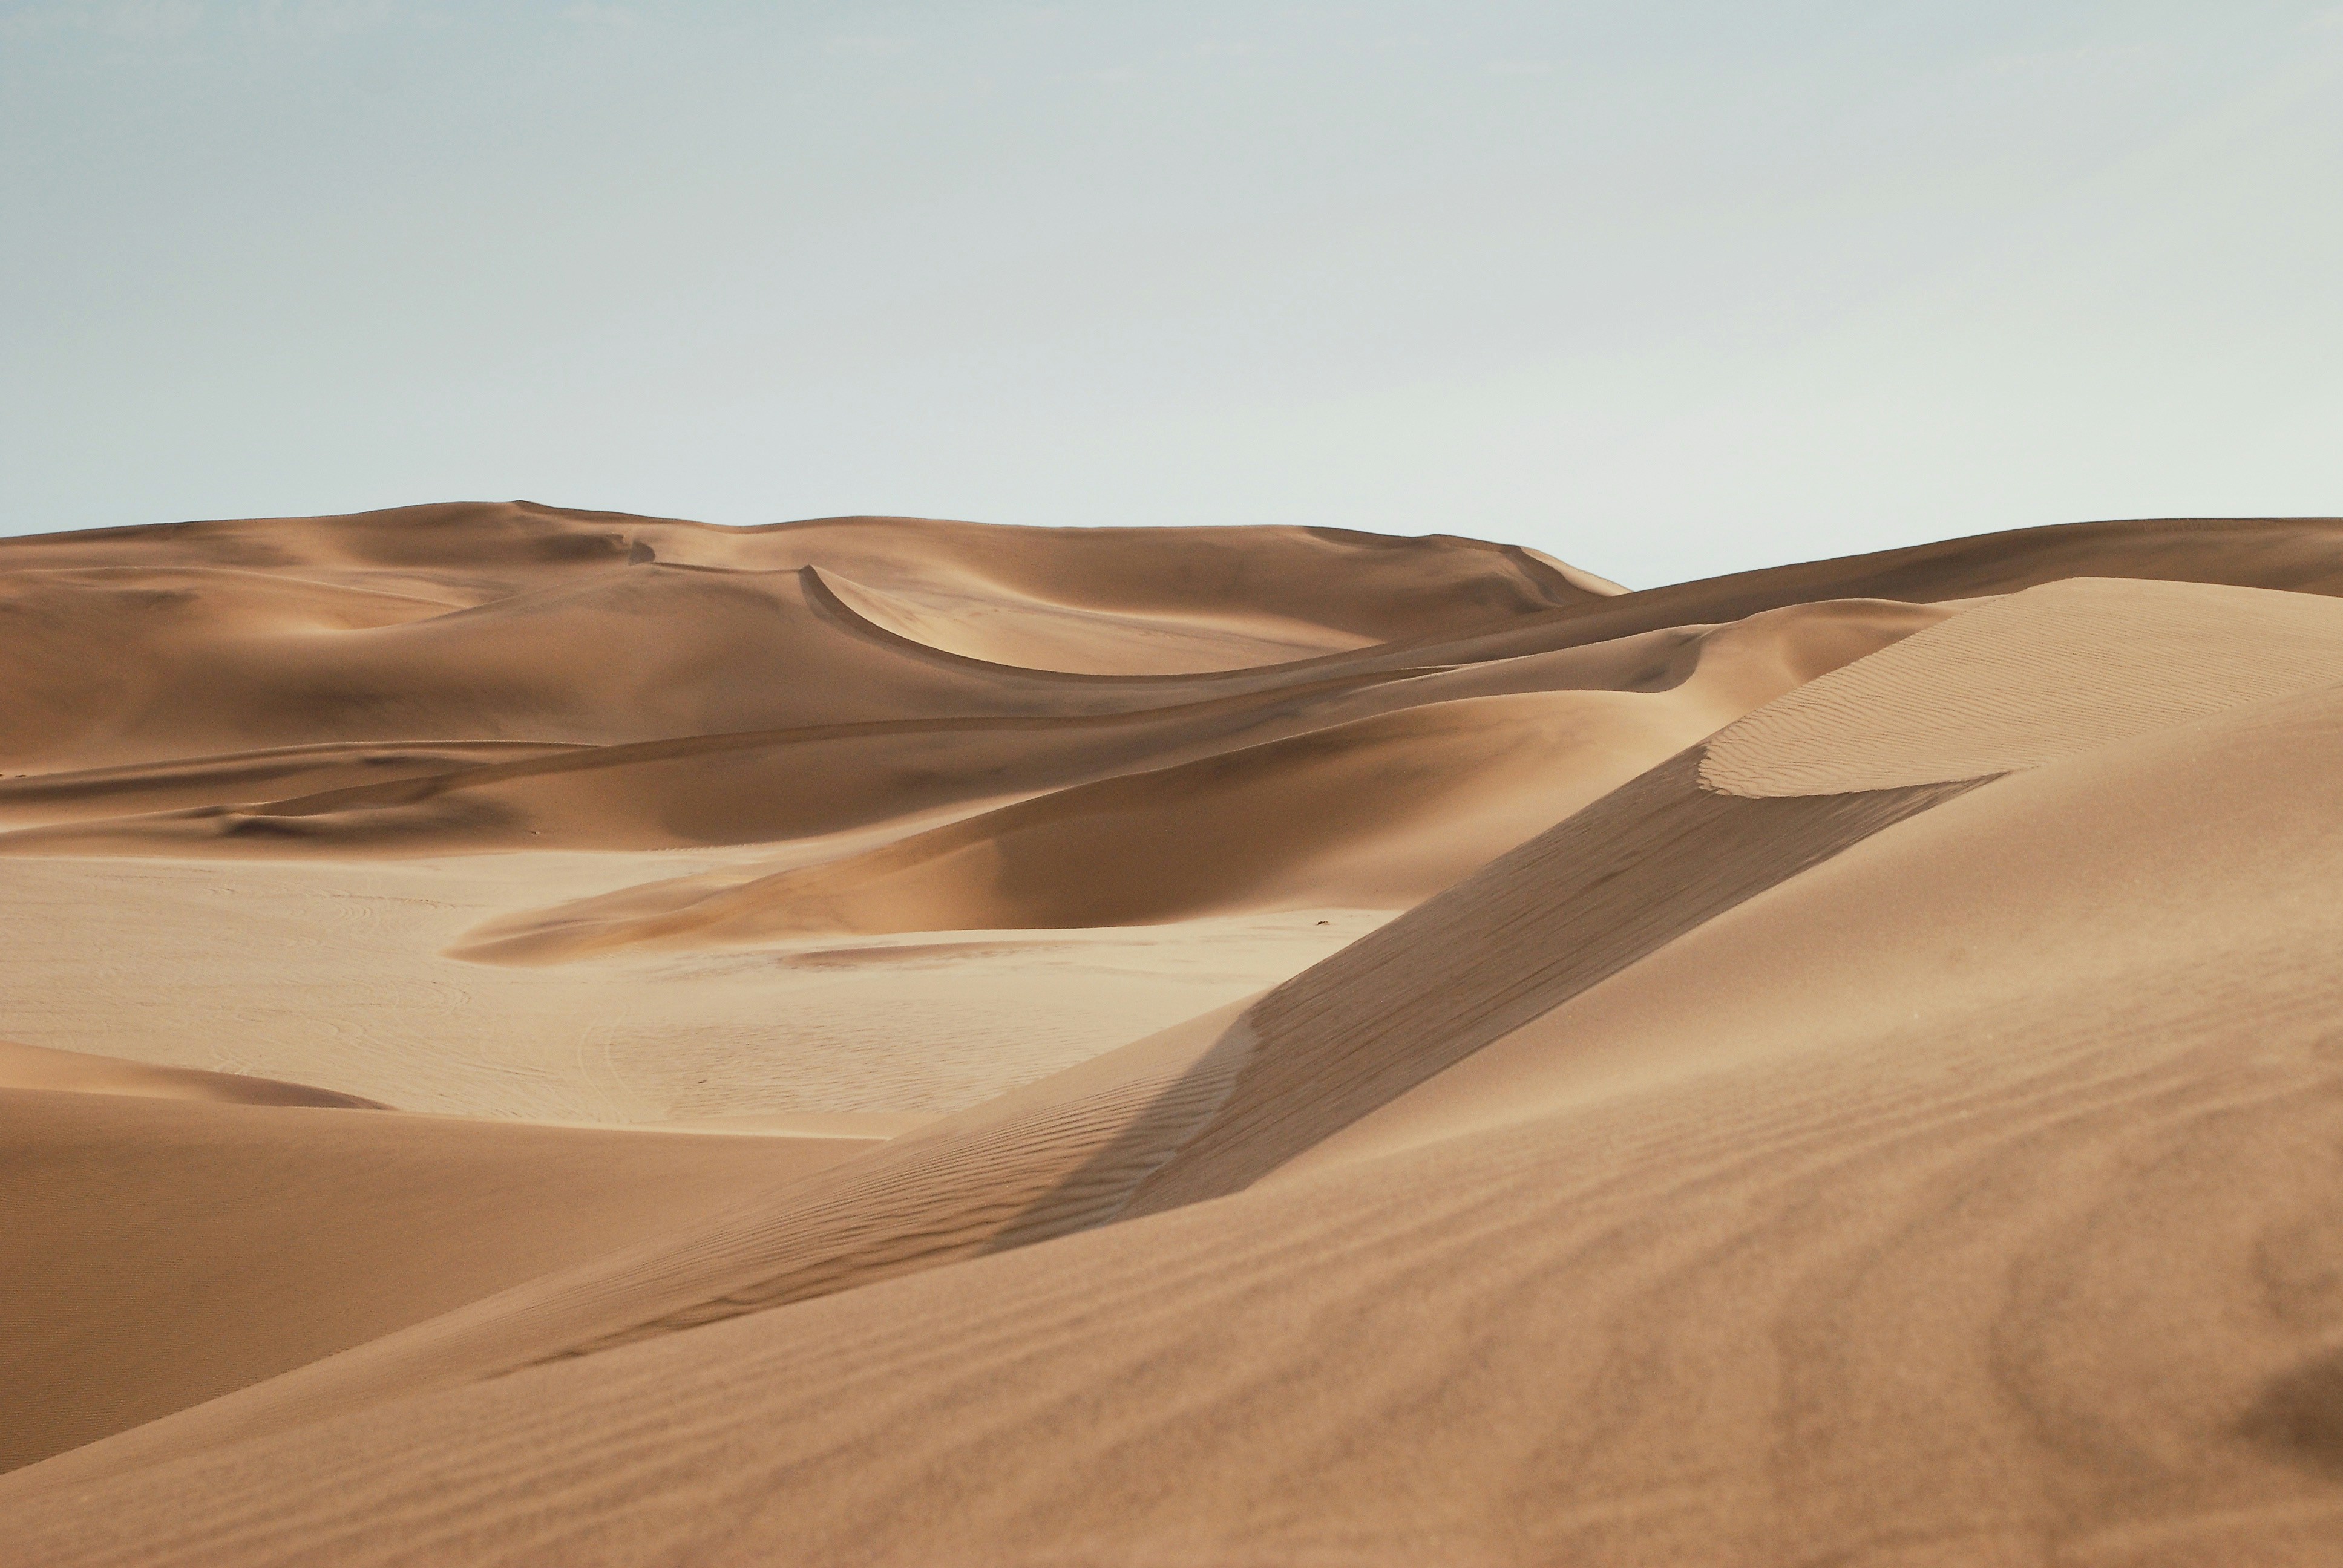 I was in Namibia directing a professional stills and video crew for a commercial commission. Tracks can take months to be erased by the wind so we had to trek for miles around potential scenes so no to disturb the pristine sand dunes.